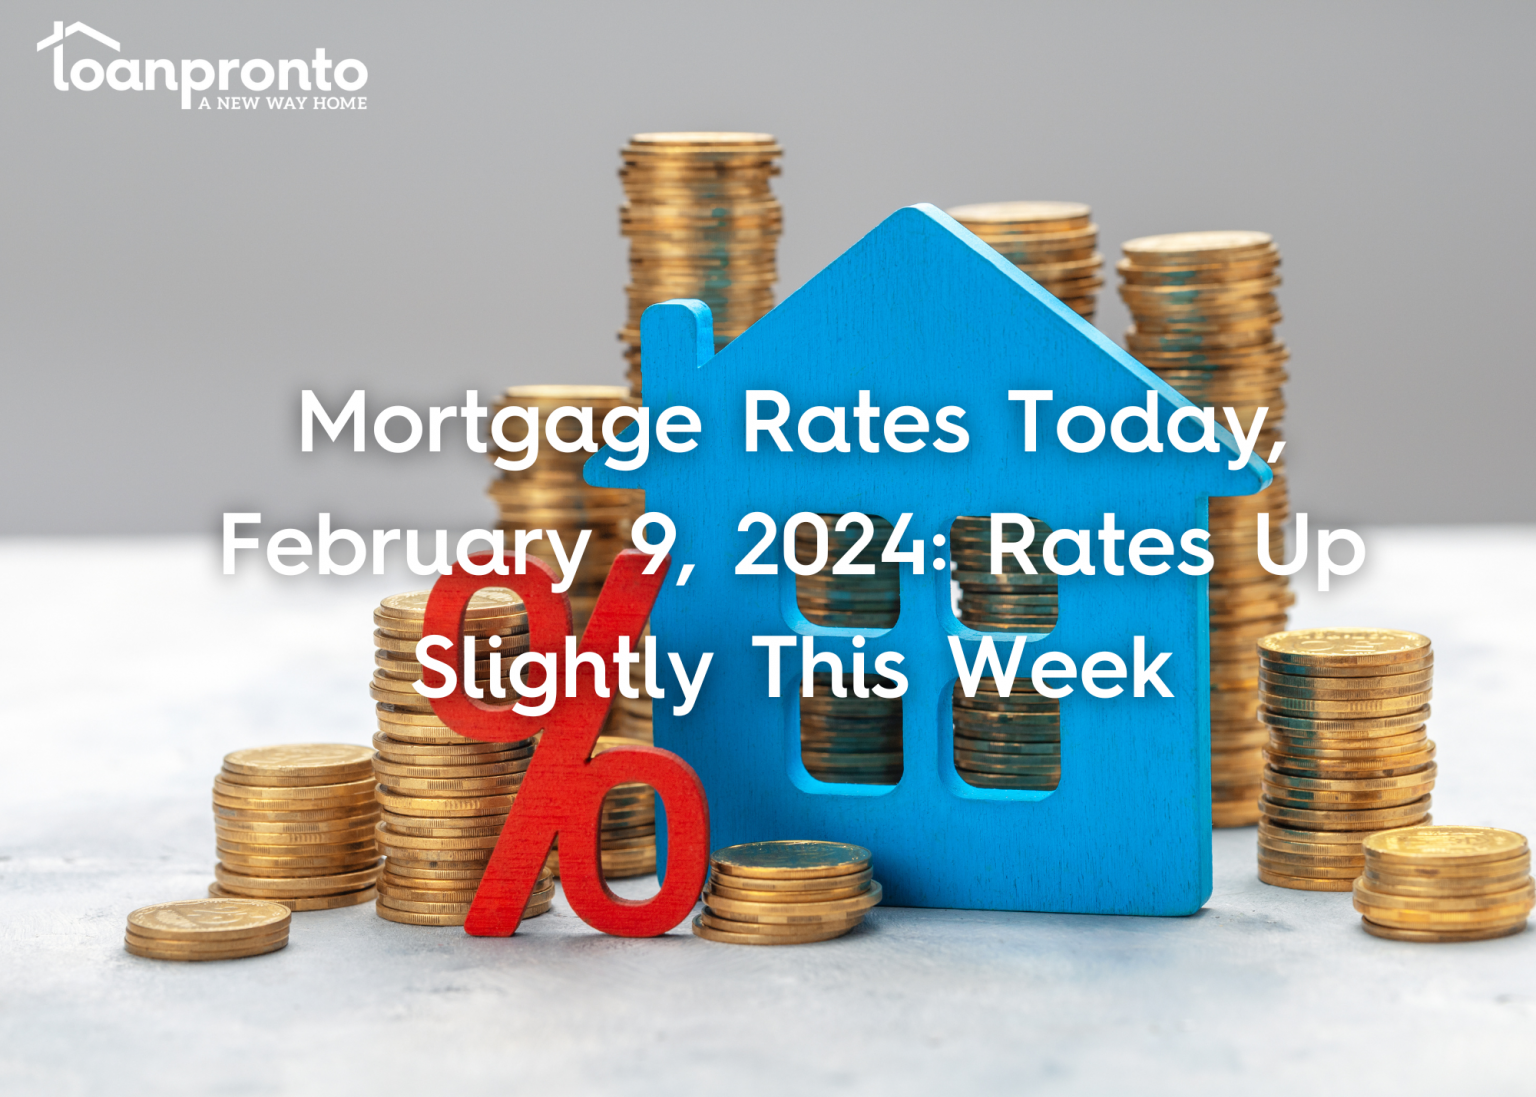 Increased mortgage rates